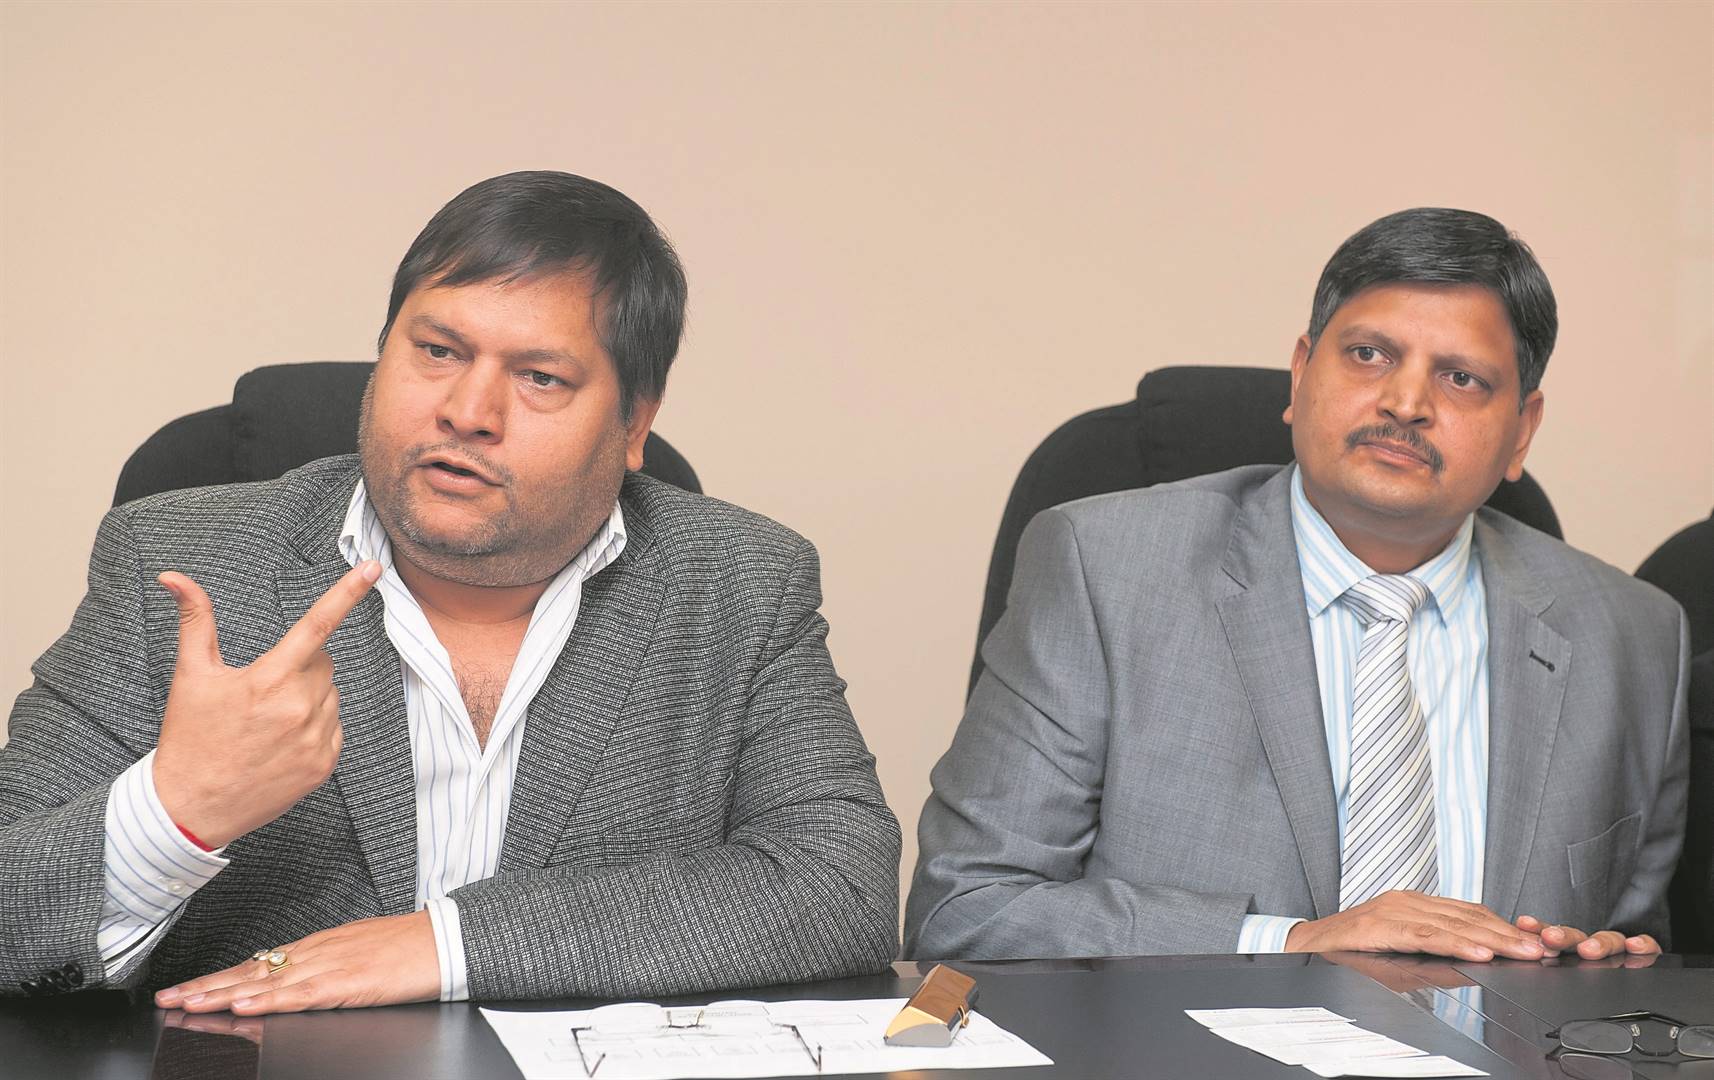 Dubai police have arrested two of the Gupta brothers, Rajesh and Atul, for charges of corruption and fraud.Photo by Gallo Images/Business Day/Martin Rhodes